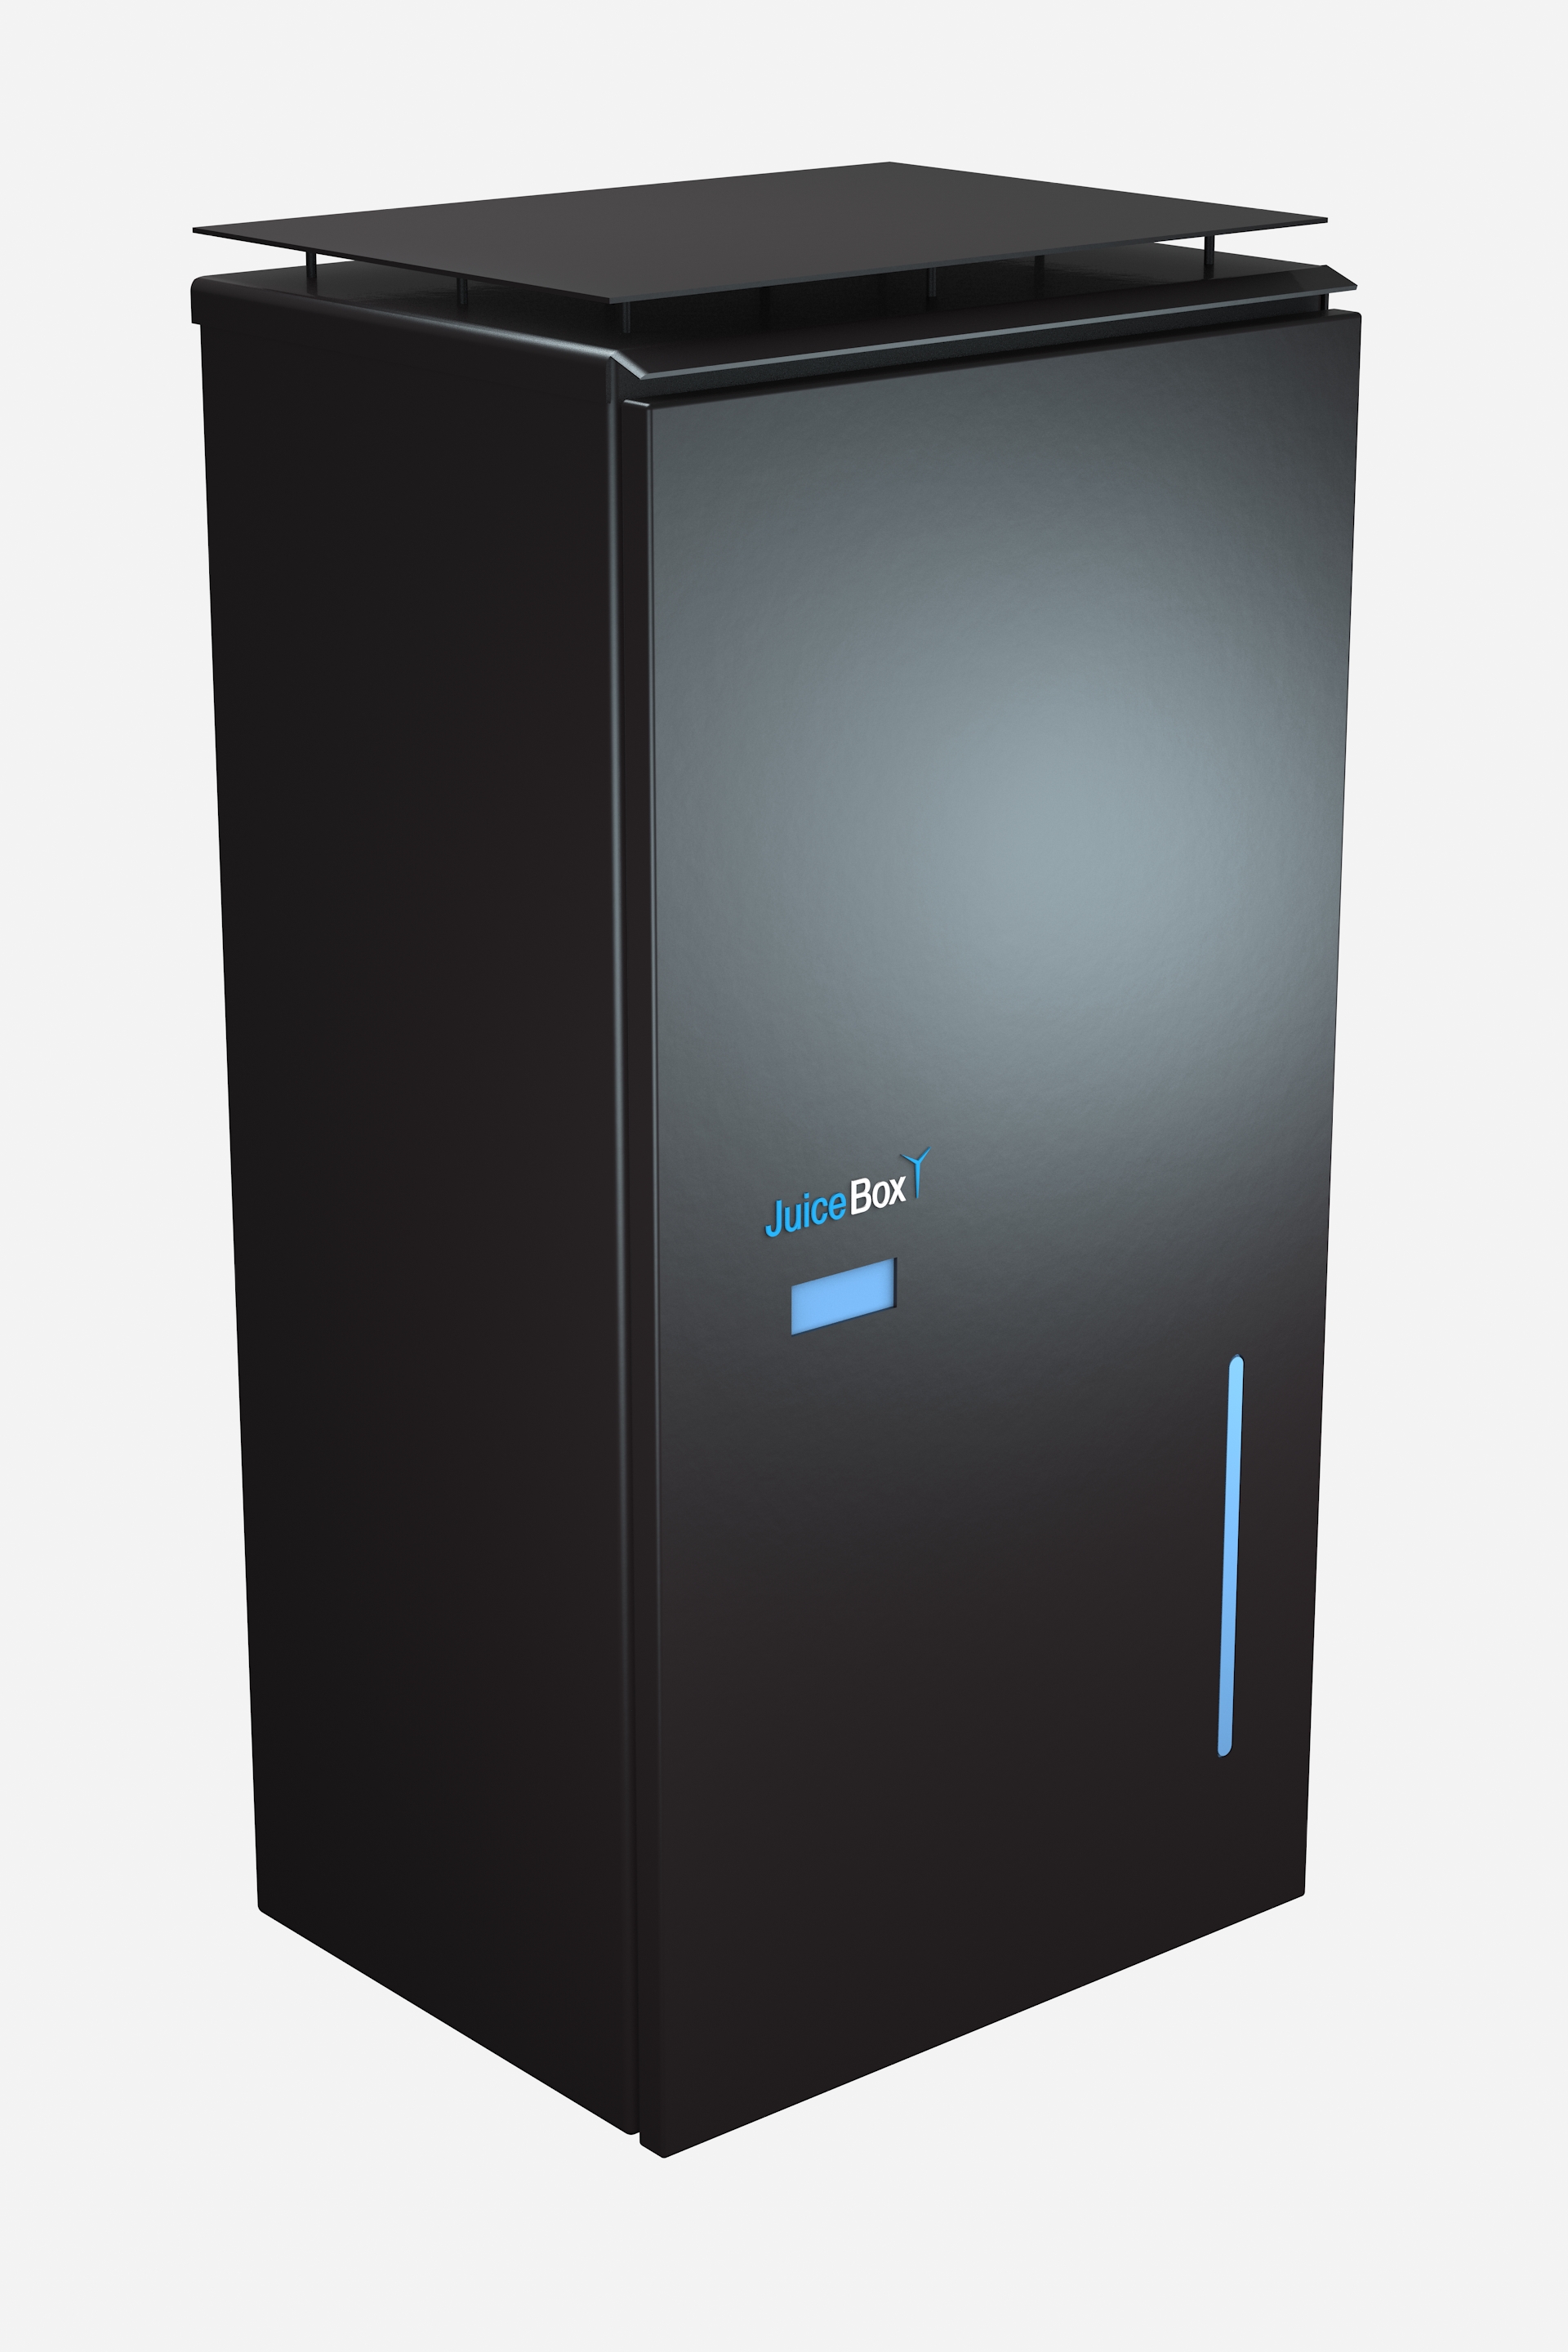 The JuiceBox 8.6kWh Residential Energy Storage System